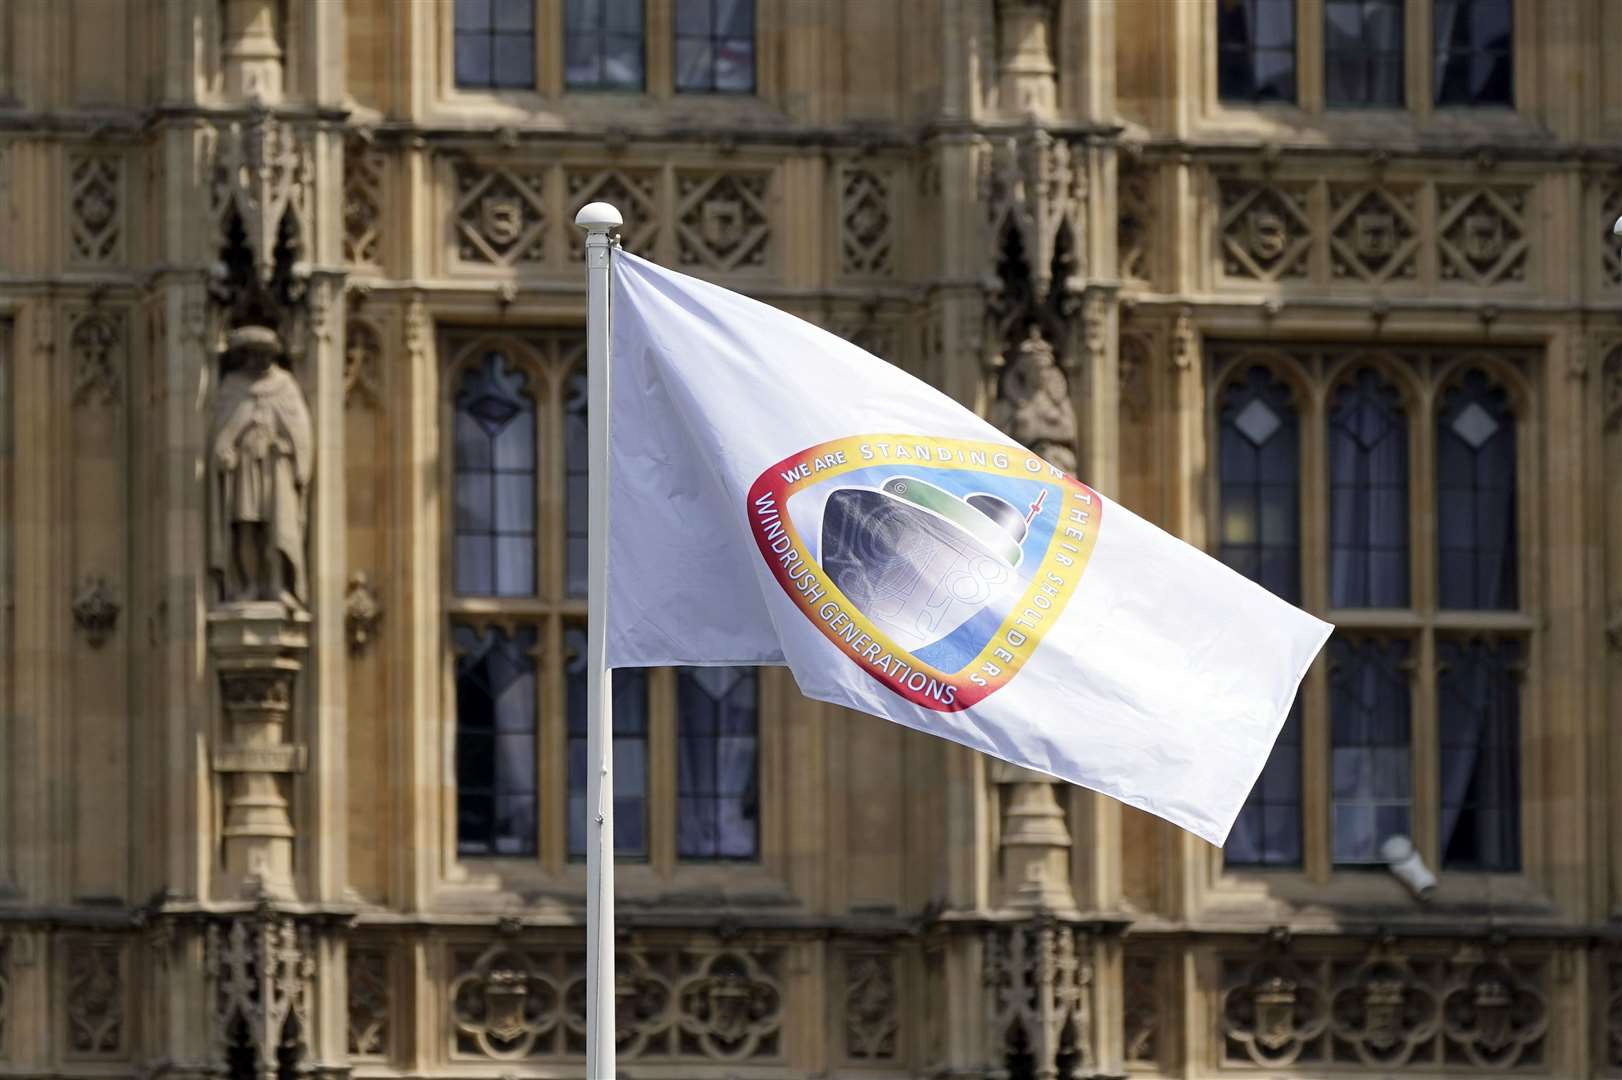 The Windrush flag flies at the Houses of Parliament (Aaron Chown/PA)